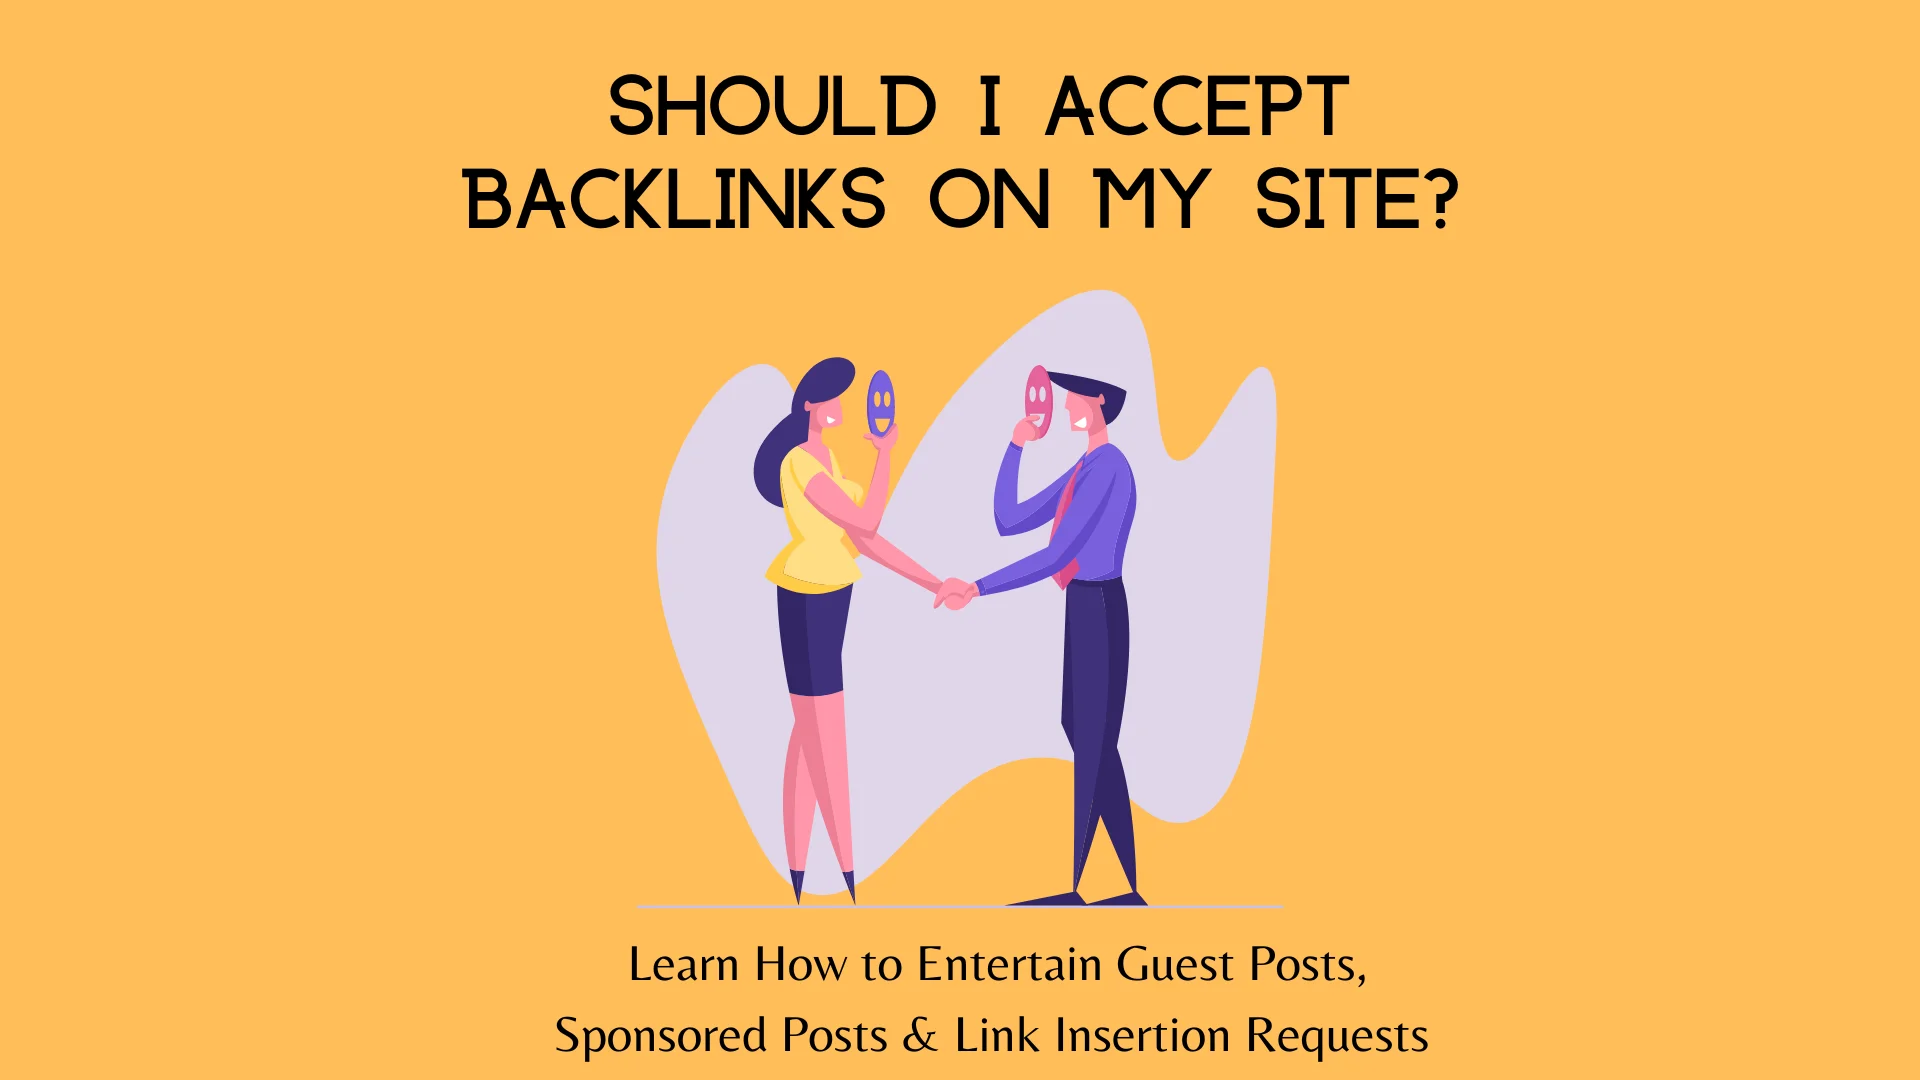 should I accept backlinks /guest posts on my website? featured image